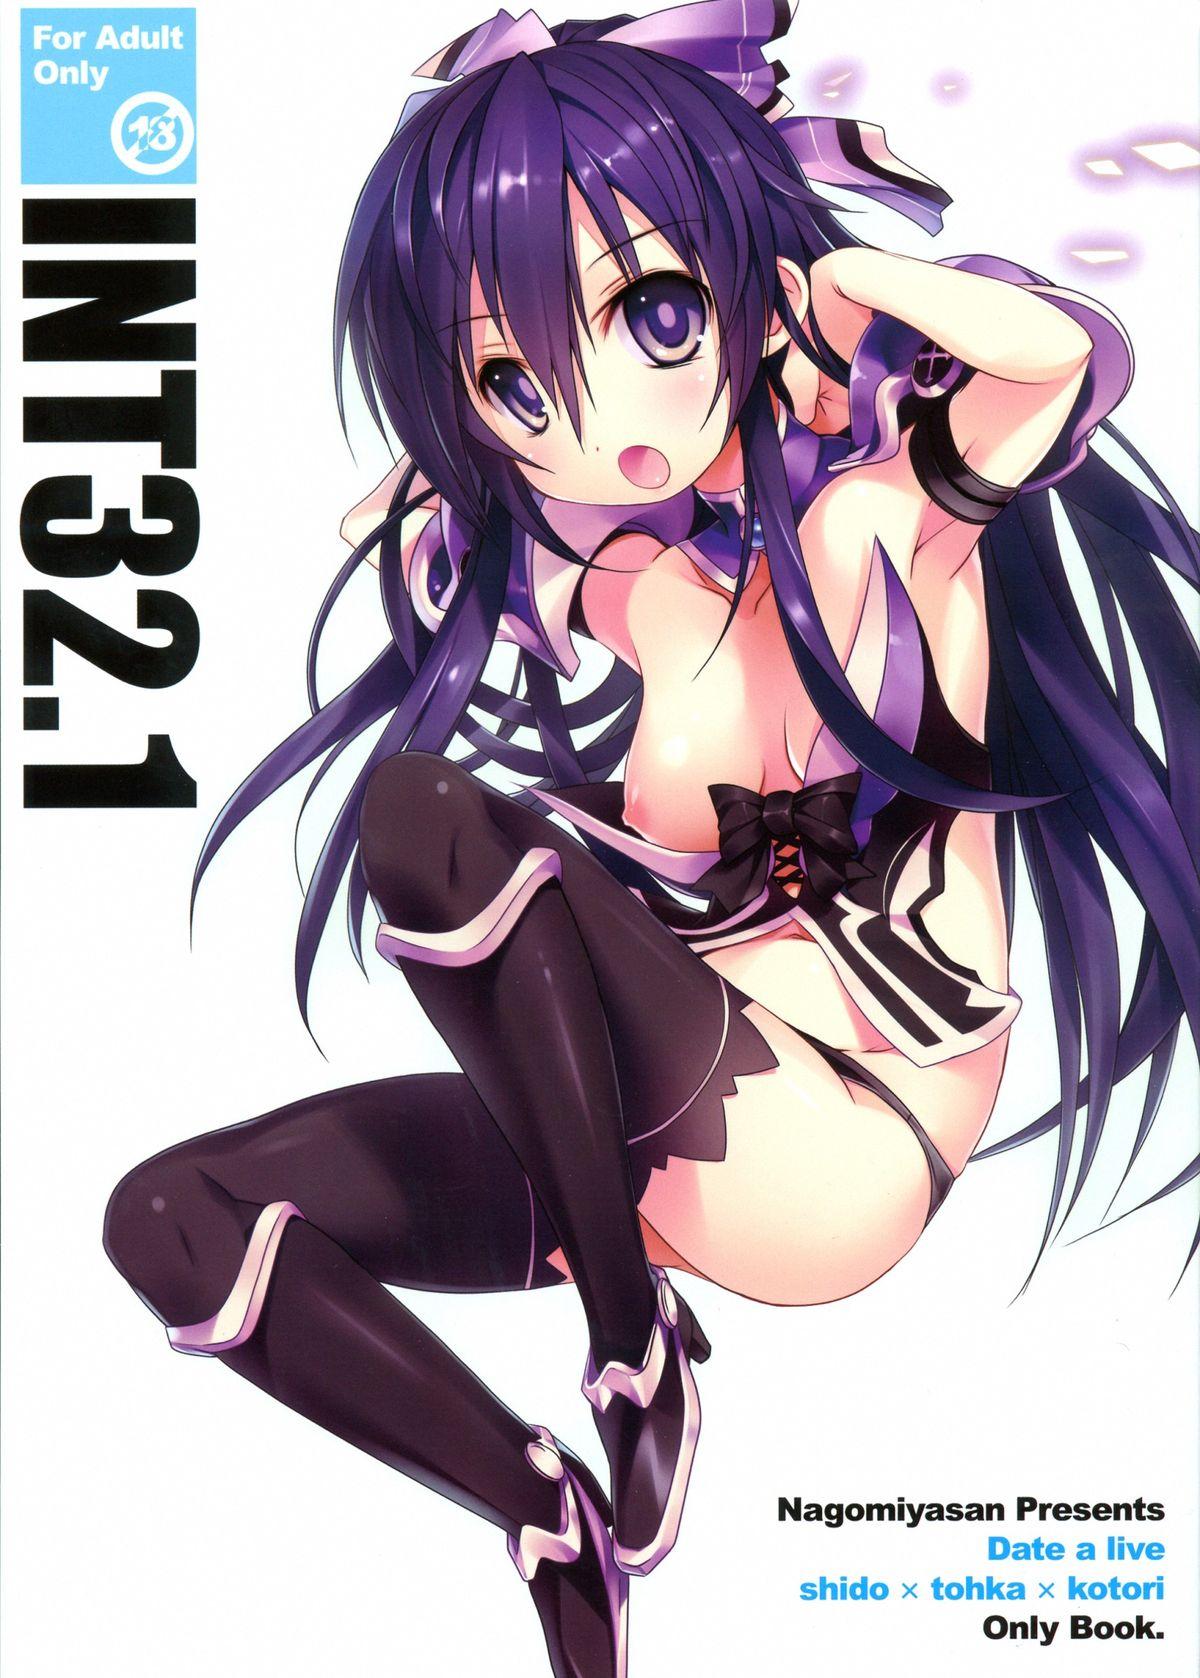 Stepbrother INT32.1 - Date a live Enema - Picture 1